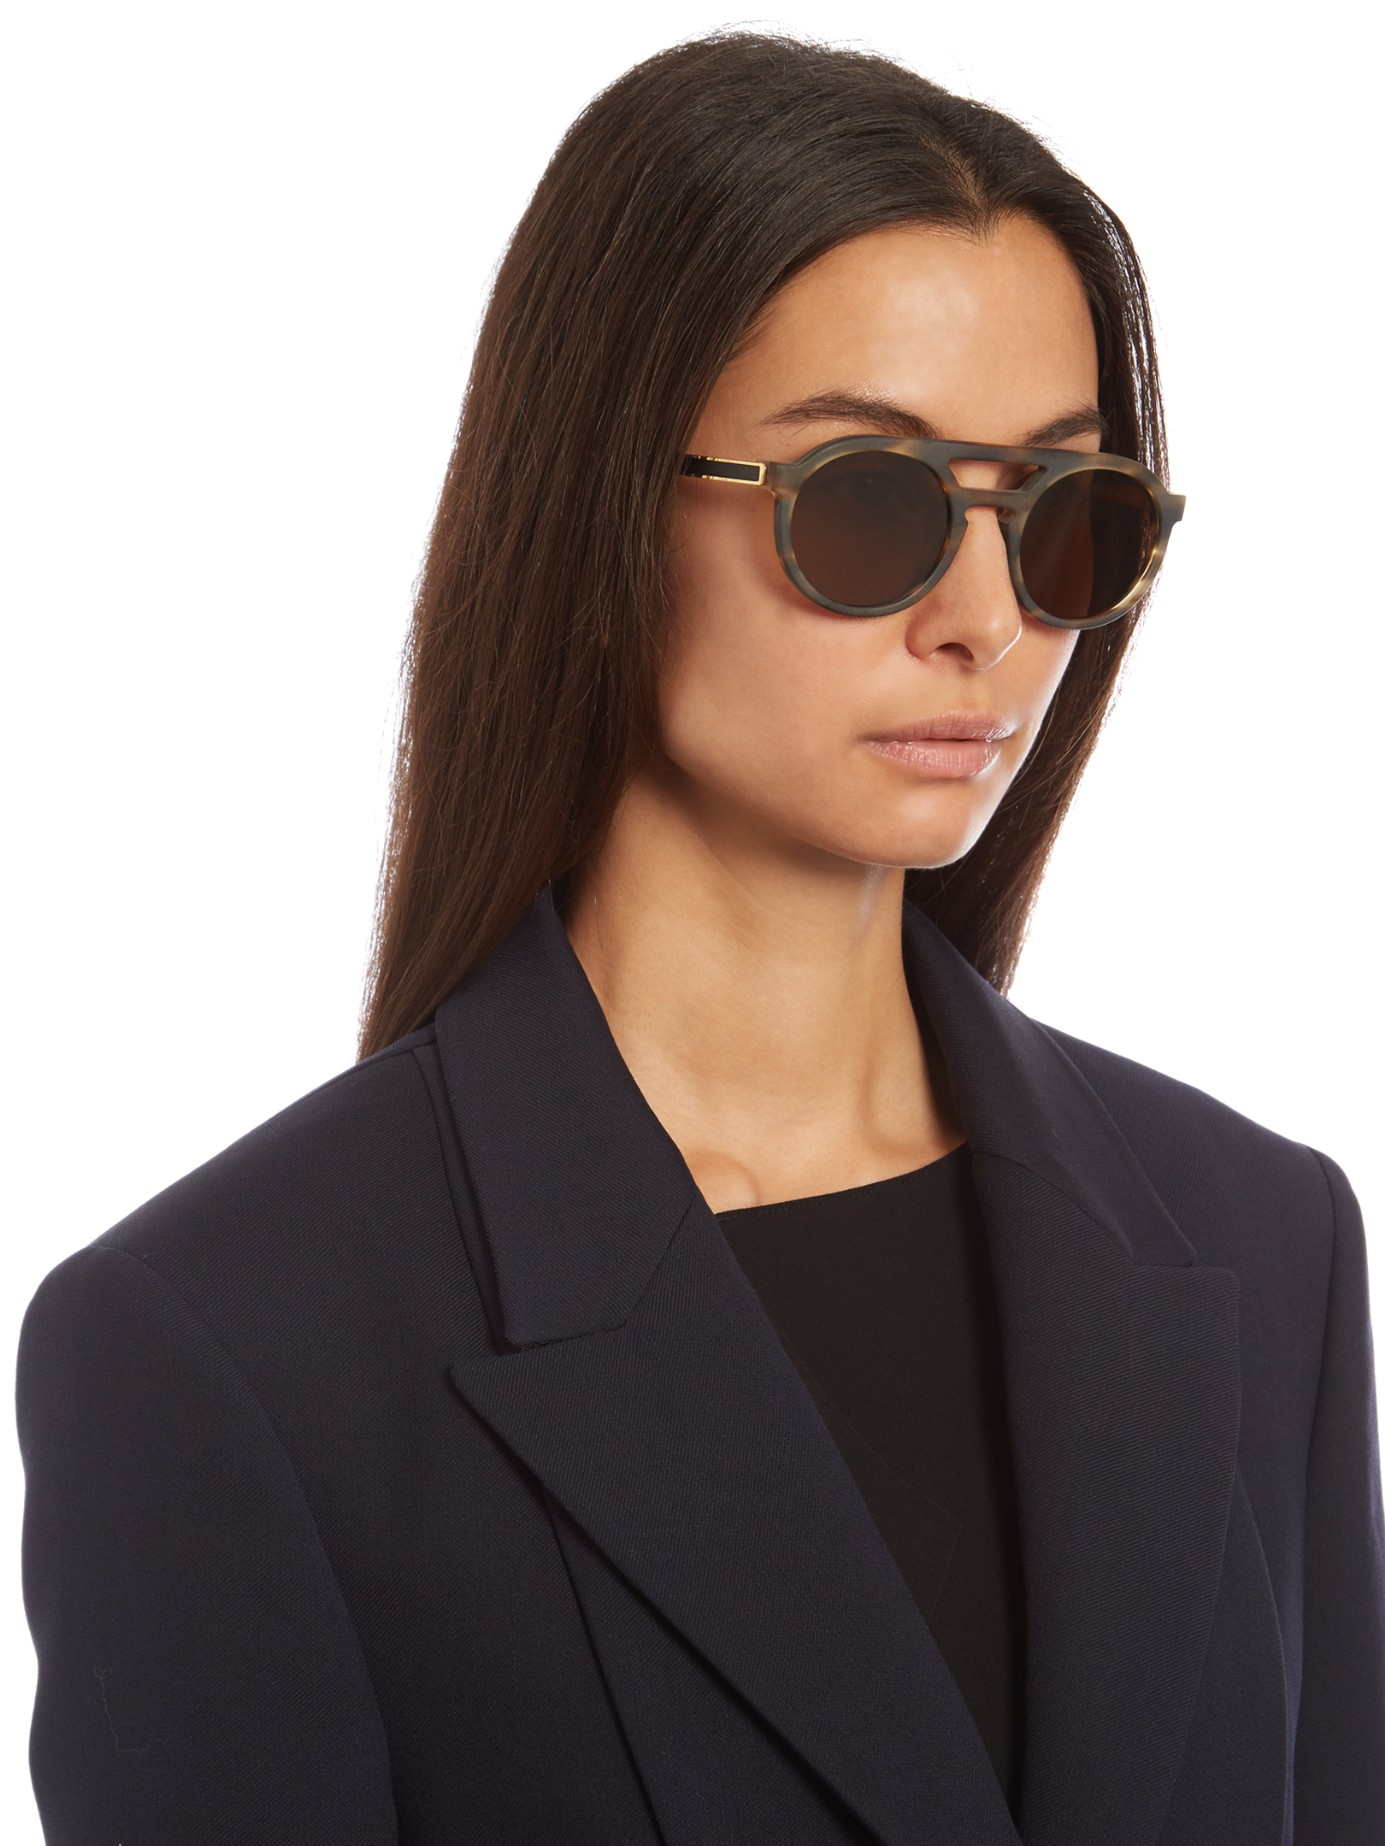 Thierry Lasry Gravity Round-frame Sunglasses in Brown - Lyst